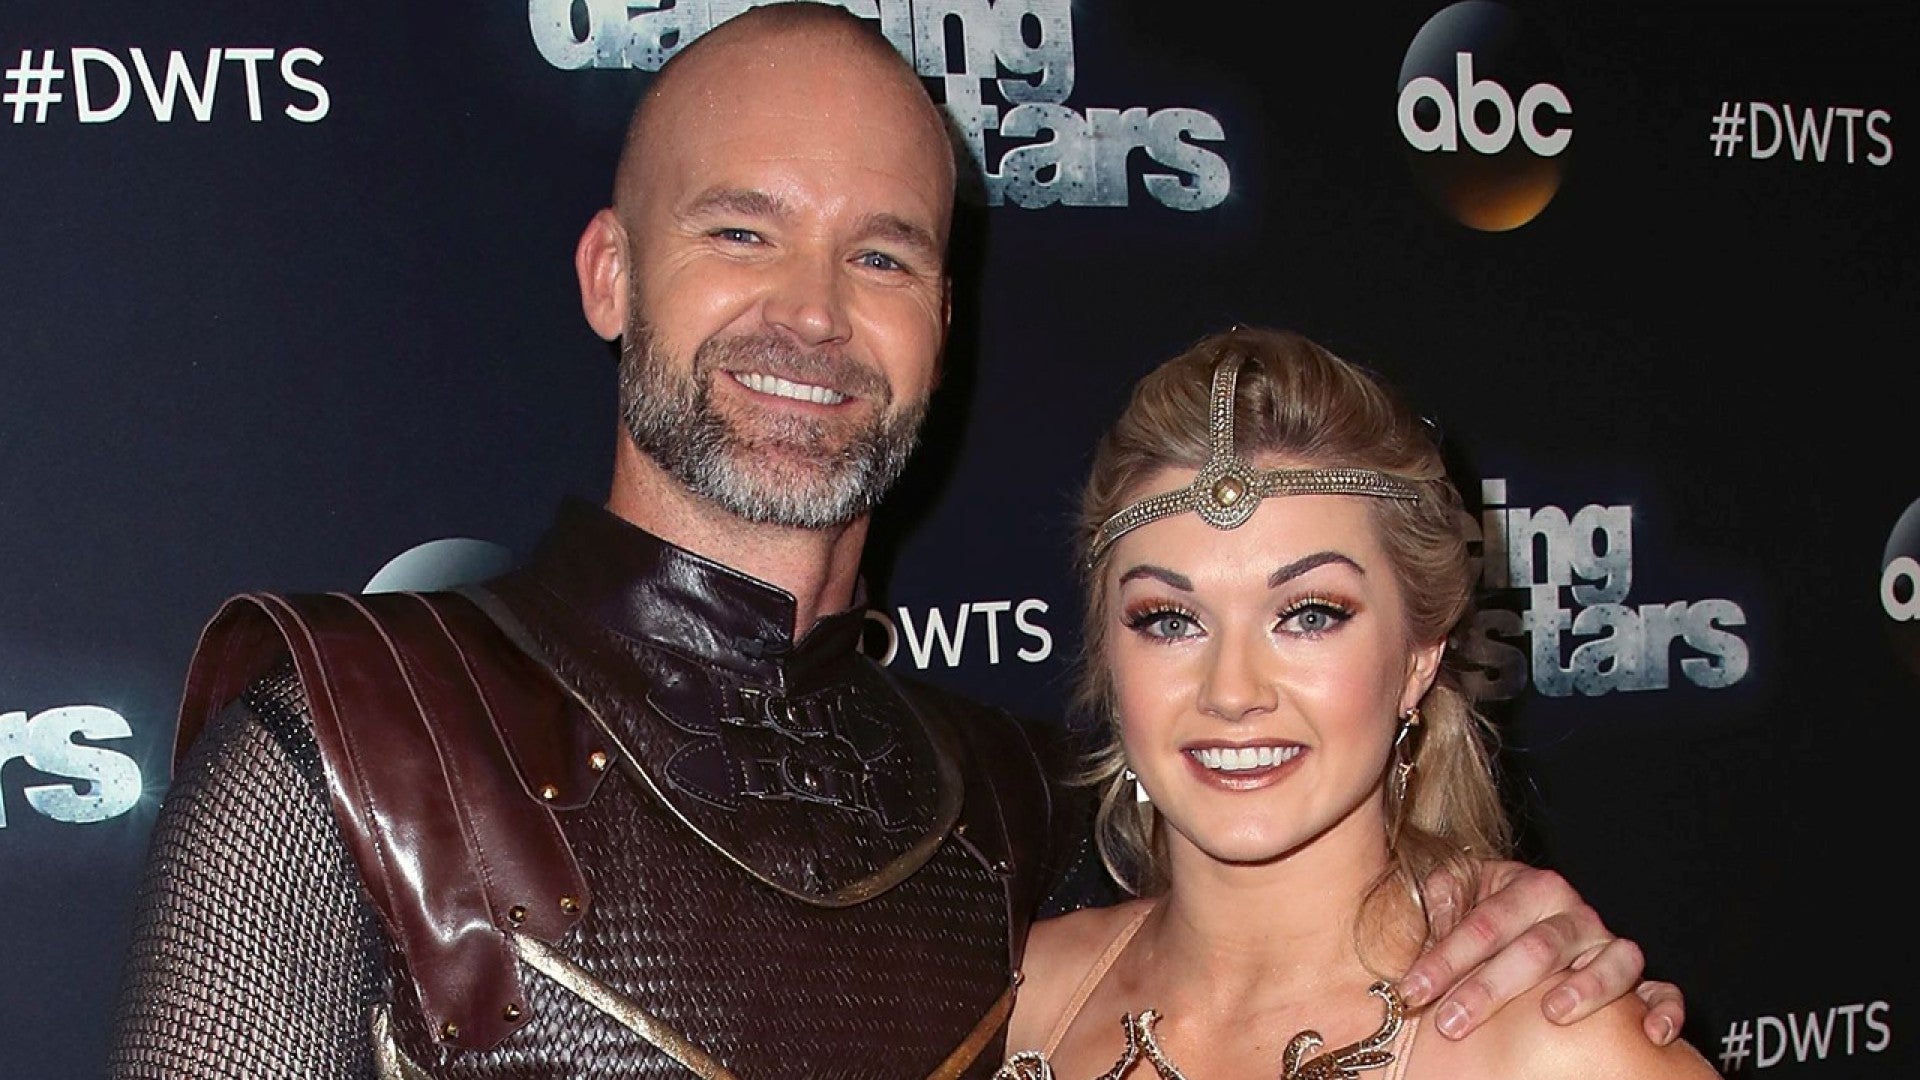 EXCLUSIVE: David Ross Opens Up About His Emotional Night on 'DWTS